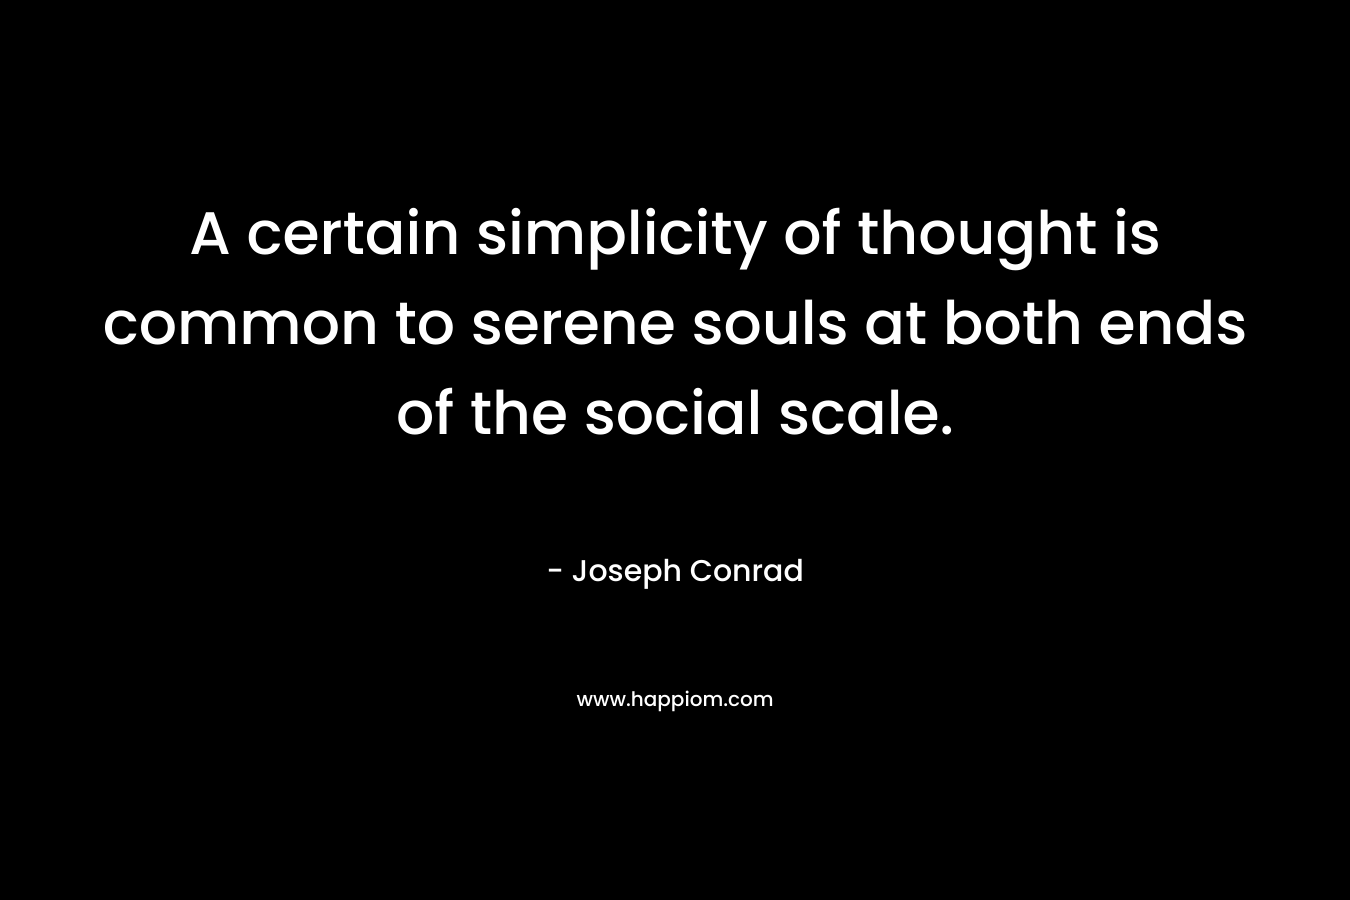 A certain simplicity of thought is common to serene souls at both ends of the social scale. – Joseph Conrad